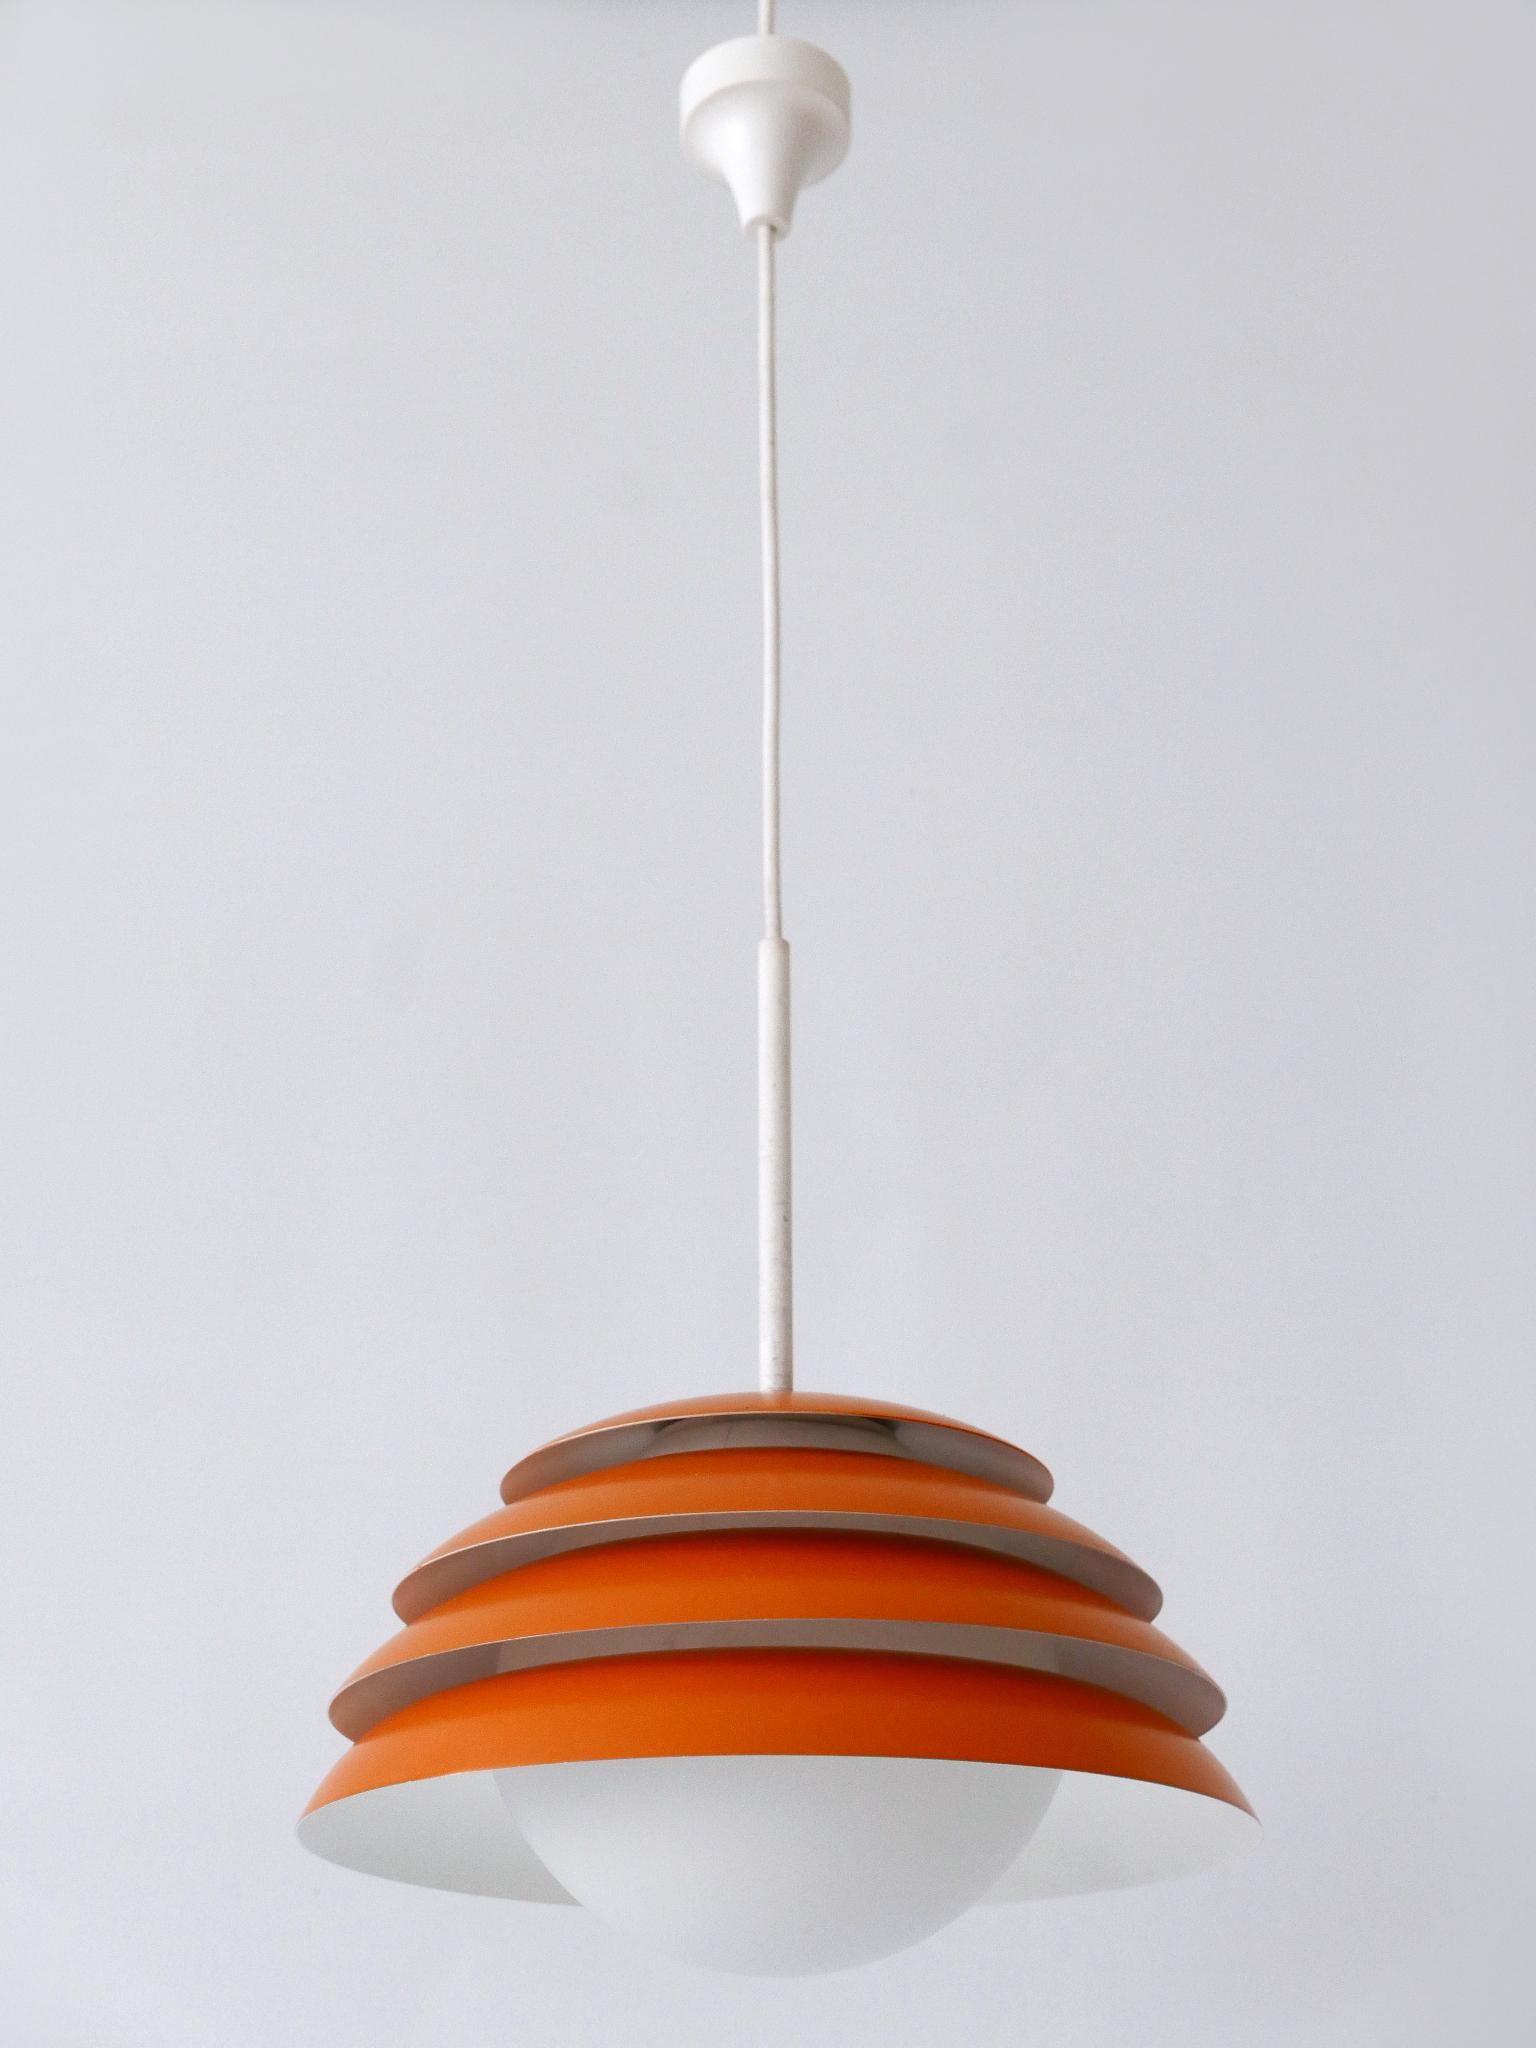 Rare & Elegant Mid Century Modern Pendant Lamp or Hanging Light Germany 1960s In Good Condition For Sale In Munich, DE